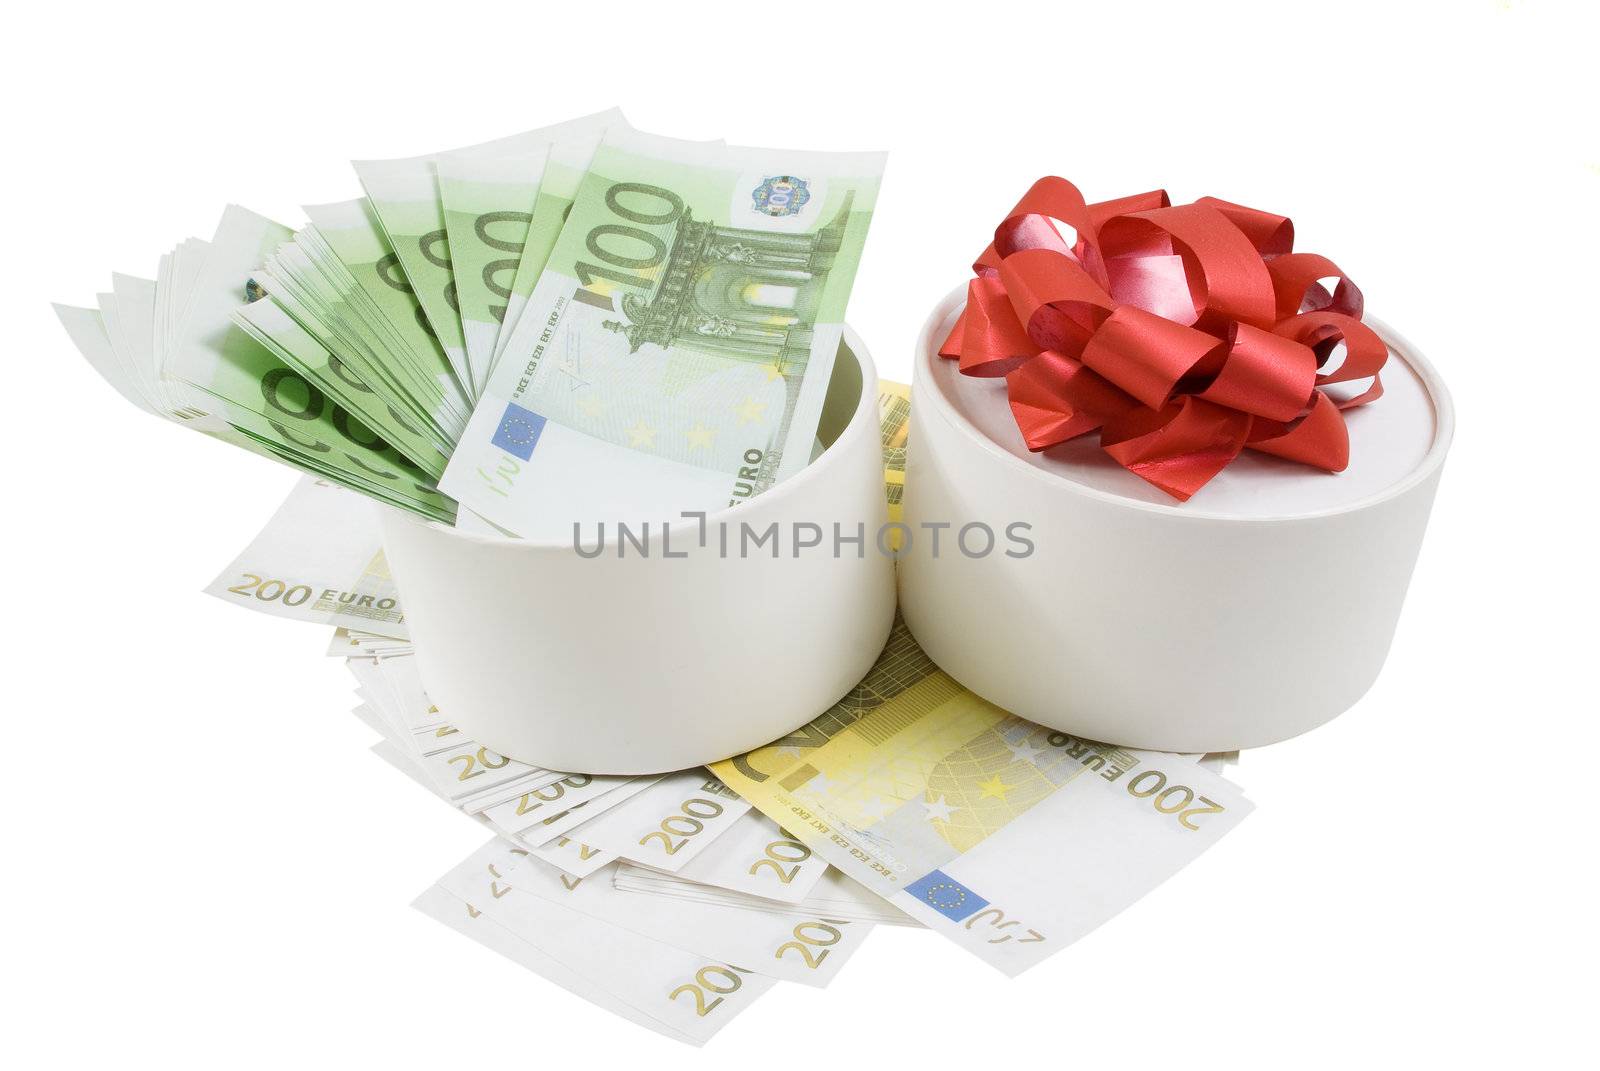 White round box withf banknotes for one and two hundred euros by BIG_TAU